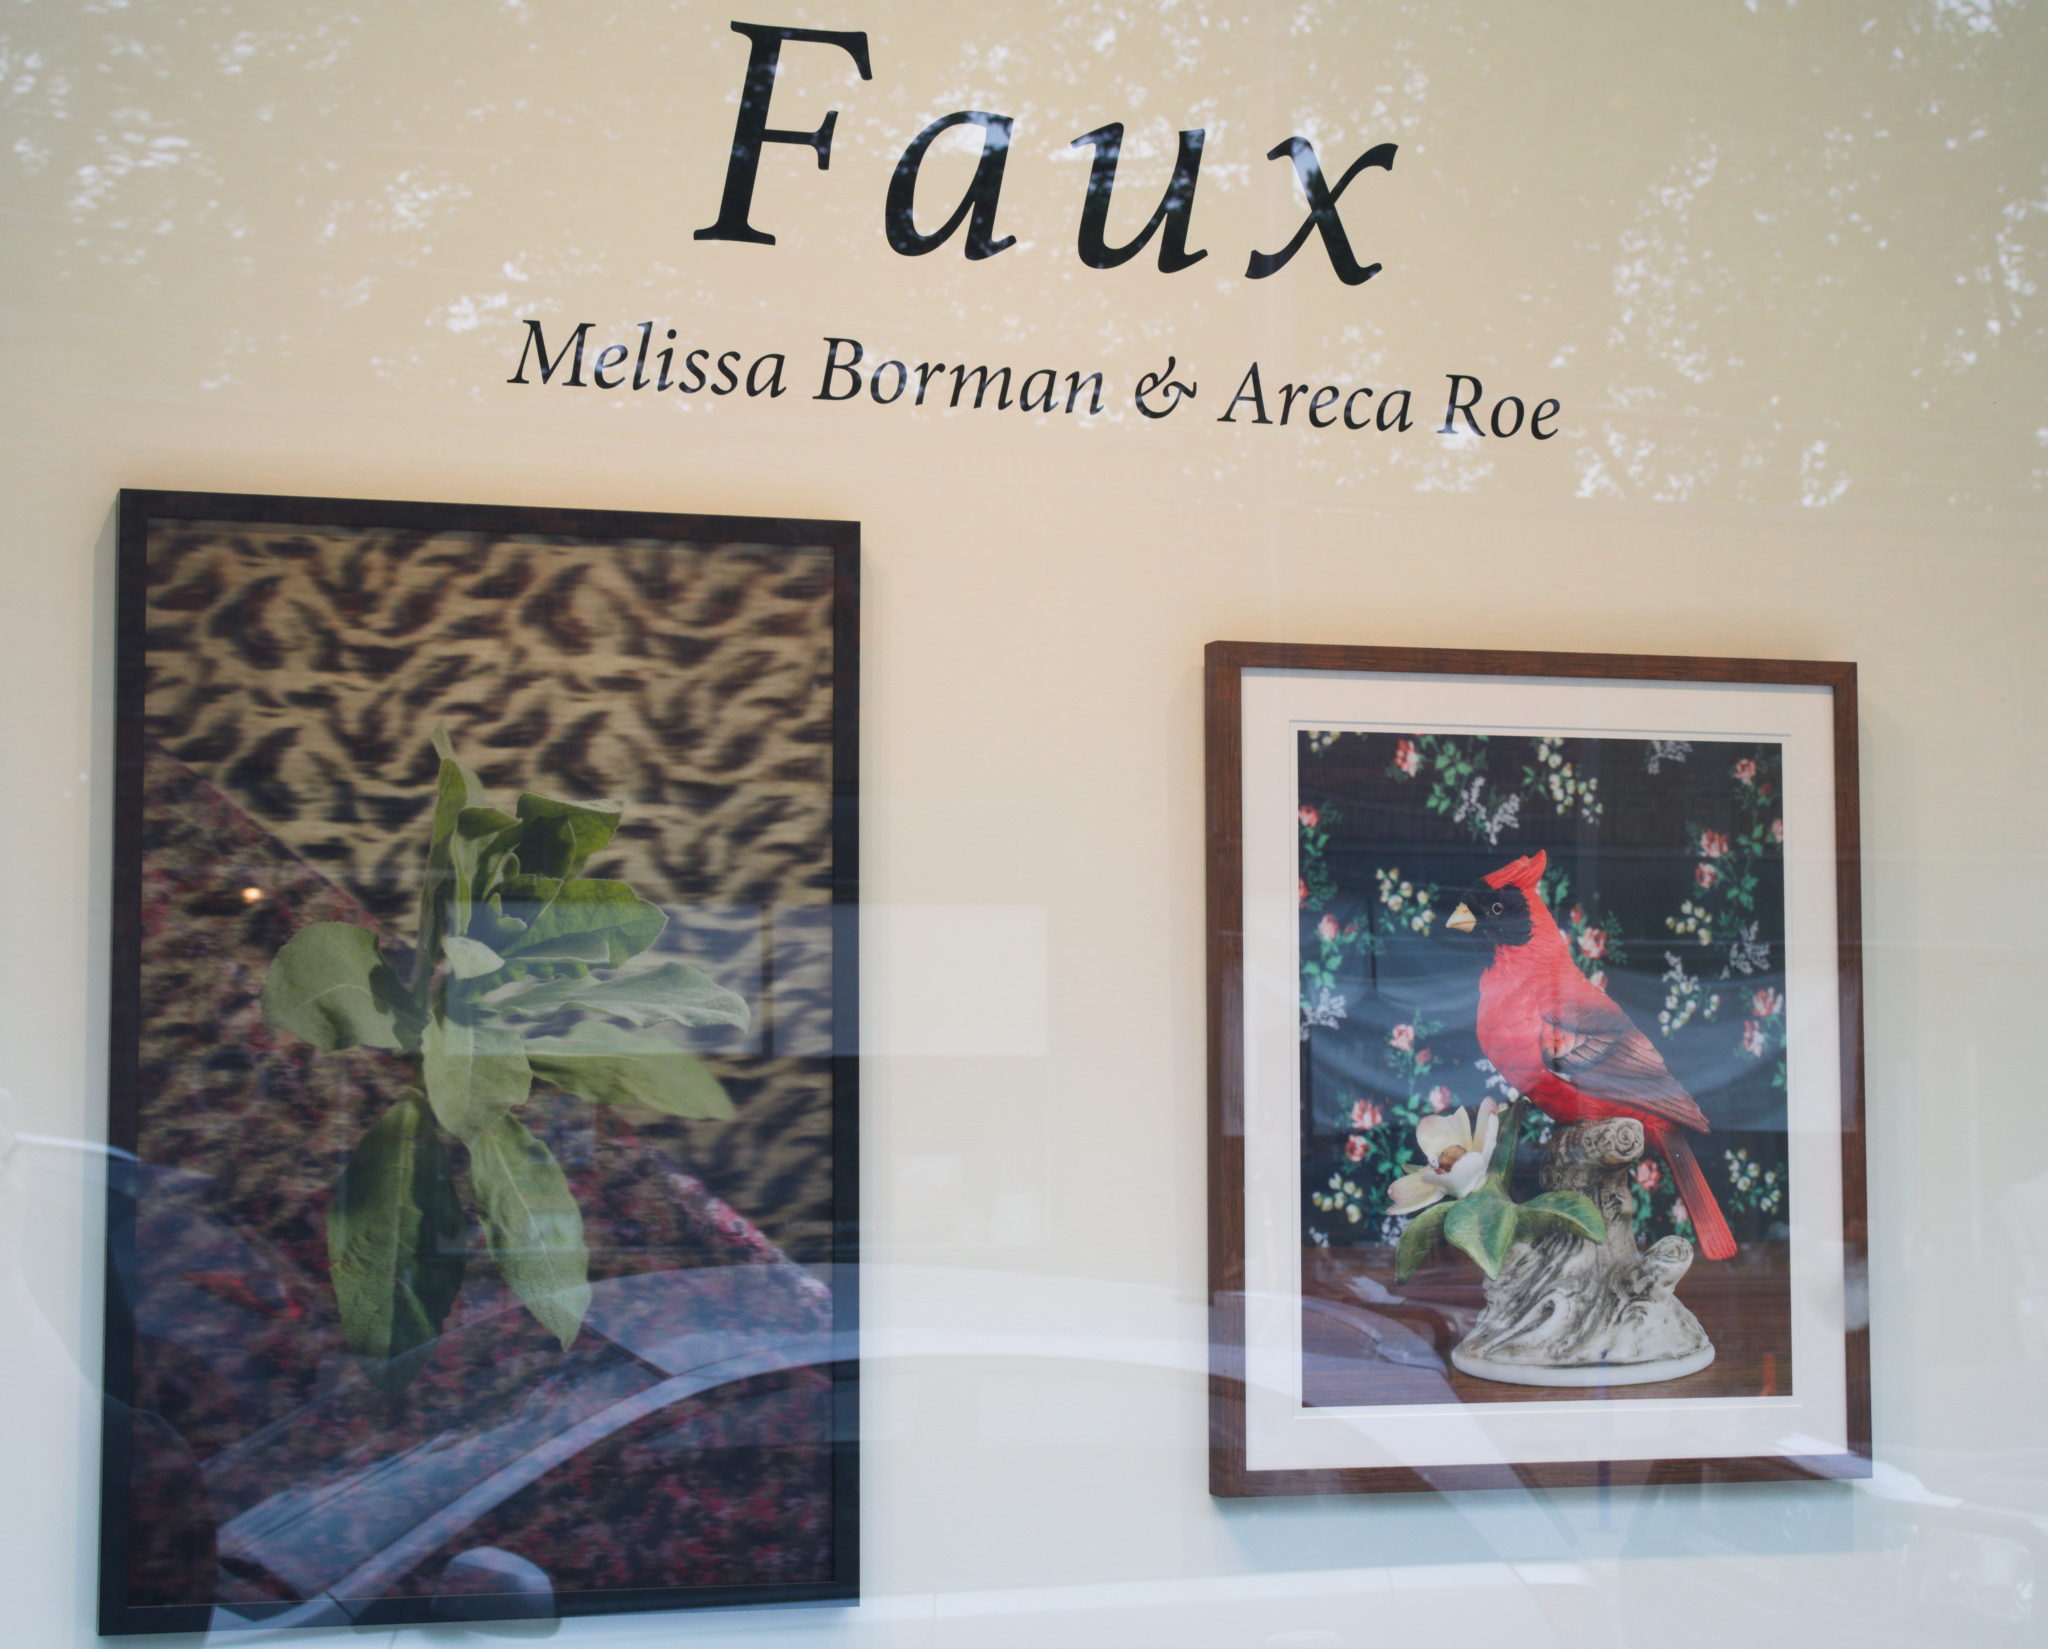 Rosalux Gallery – Faux featuring Melissa Borman and Areca Roe